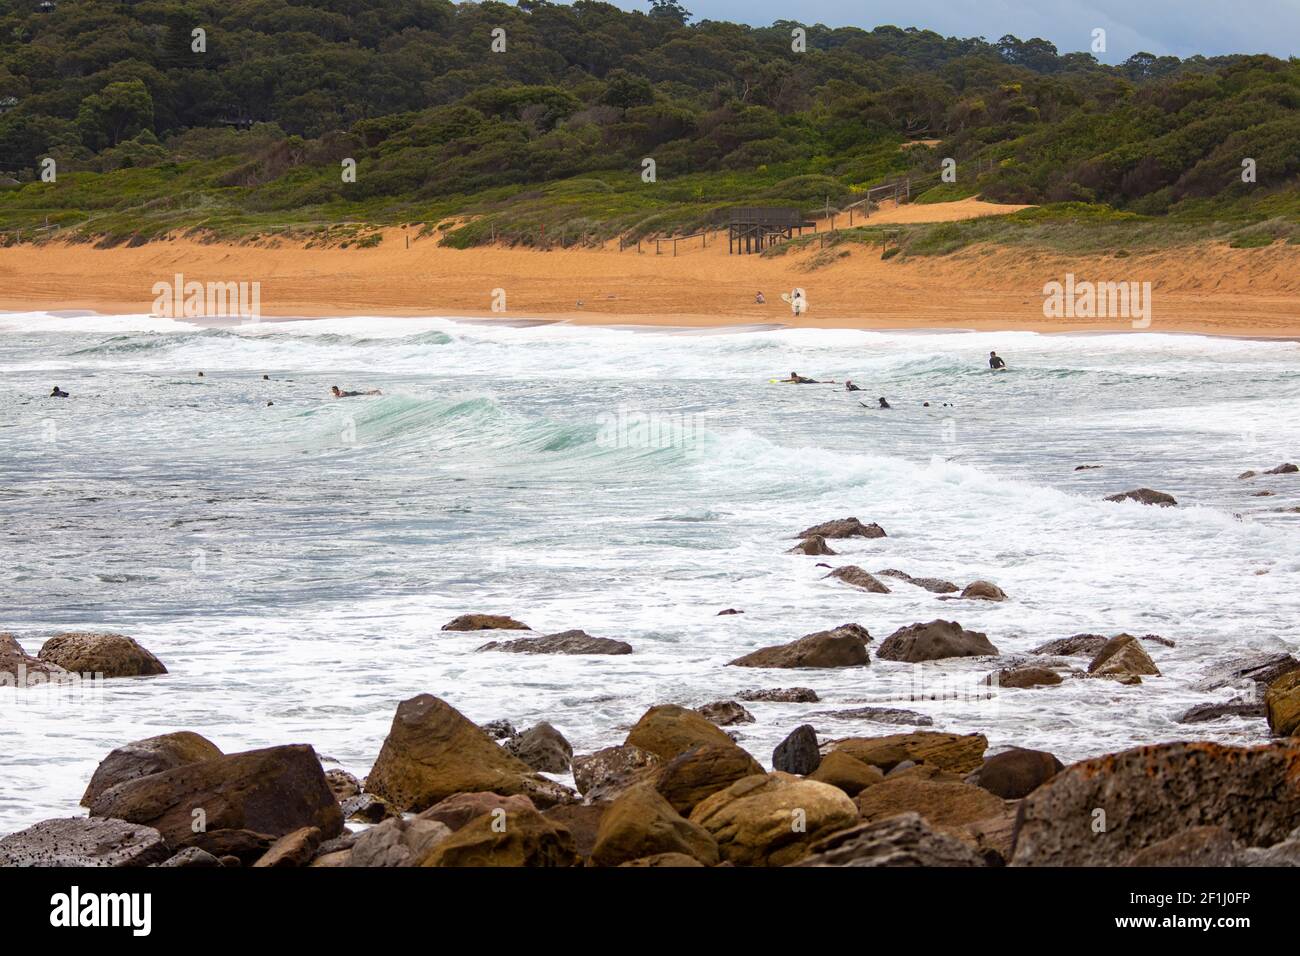 Surfers in the water at Avalon Beach in Sydney waiting for the next wave,Sydney,Australia Stock Photo